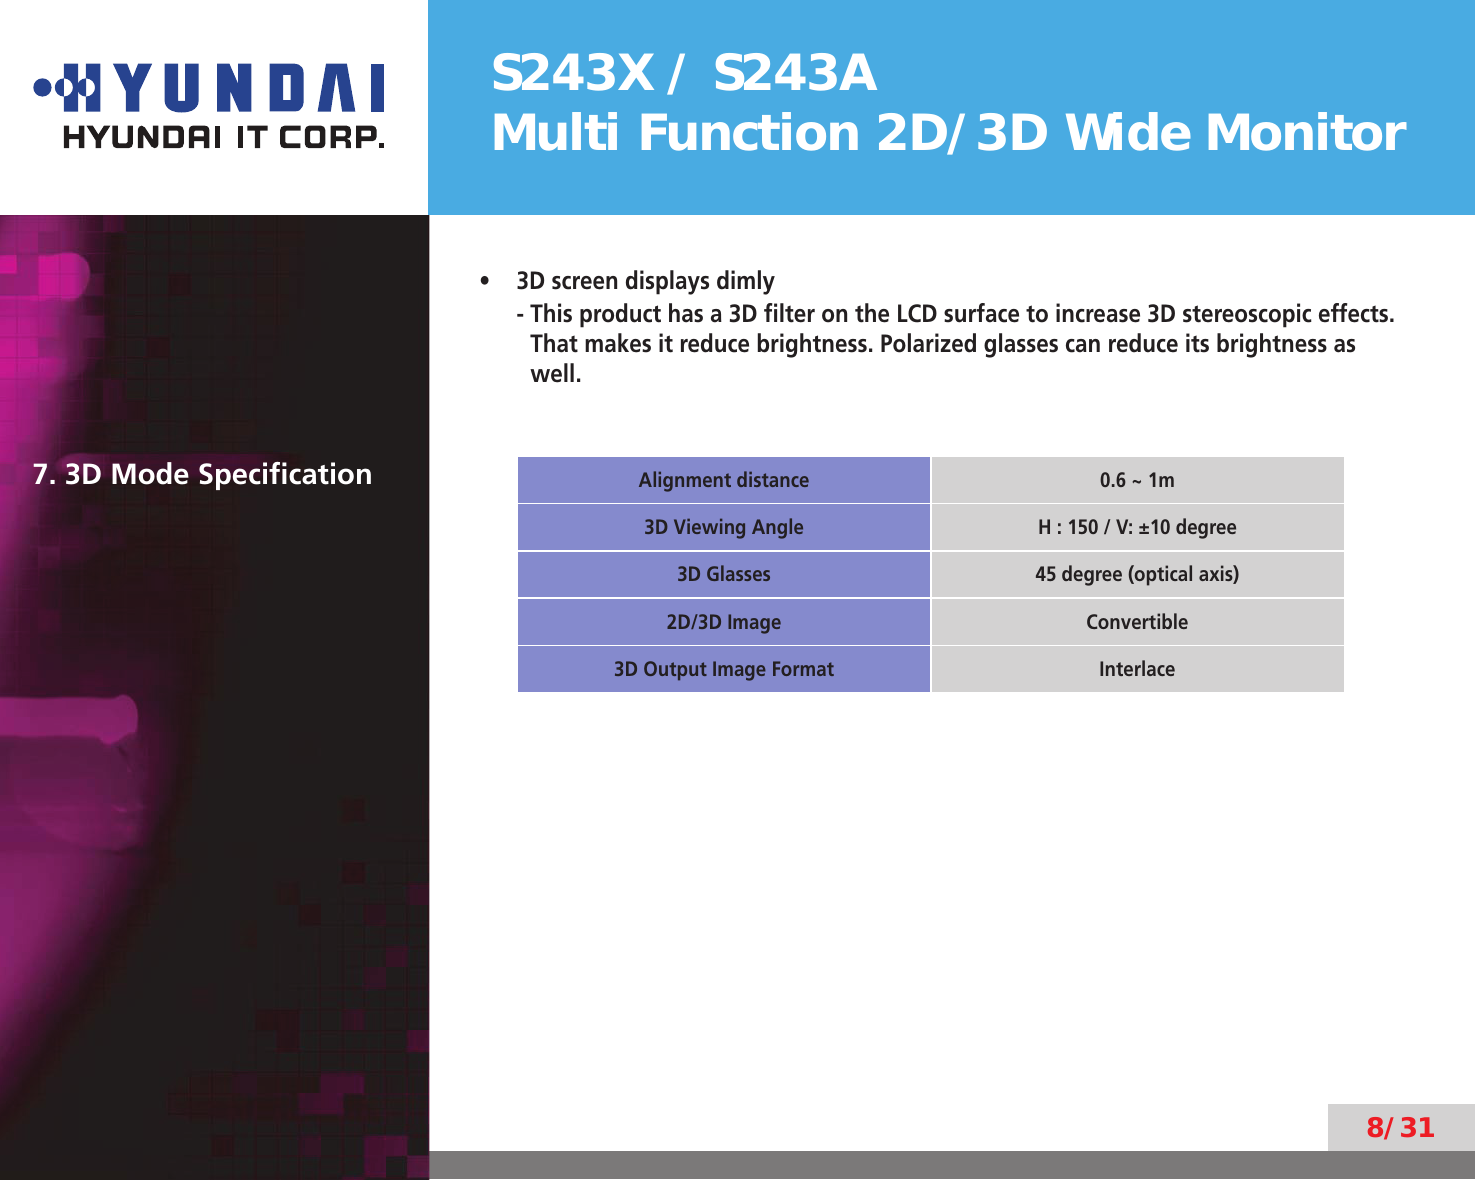 S243X / S243AMulti Function 2D/3D Wide Monitor8/313D screen displays dimly• -  This product has a 3D ﬁlter on the LCD surface to increase 3D stereoscopic effects. That makes it reduce brightness. Polarized glasses can reduce its brightness as well.7. 3D Mode SpeciﬁcationAlignment distance 0.6 ~ 1m3D Viewing Angle H : 150 / V: ±10 degree3D Glasses 45 degree (optical axis)2D/3D Image Convertible3D Output Image Format Interlace